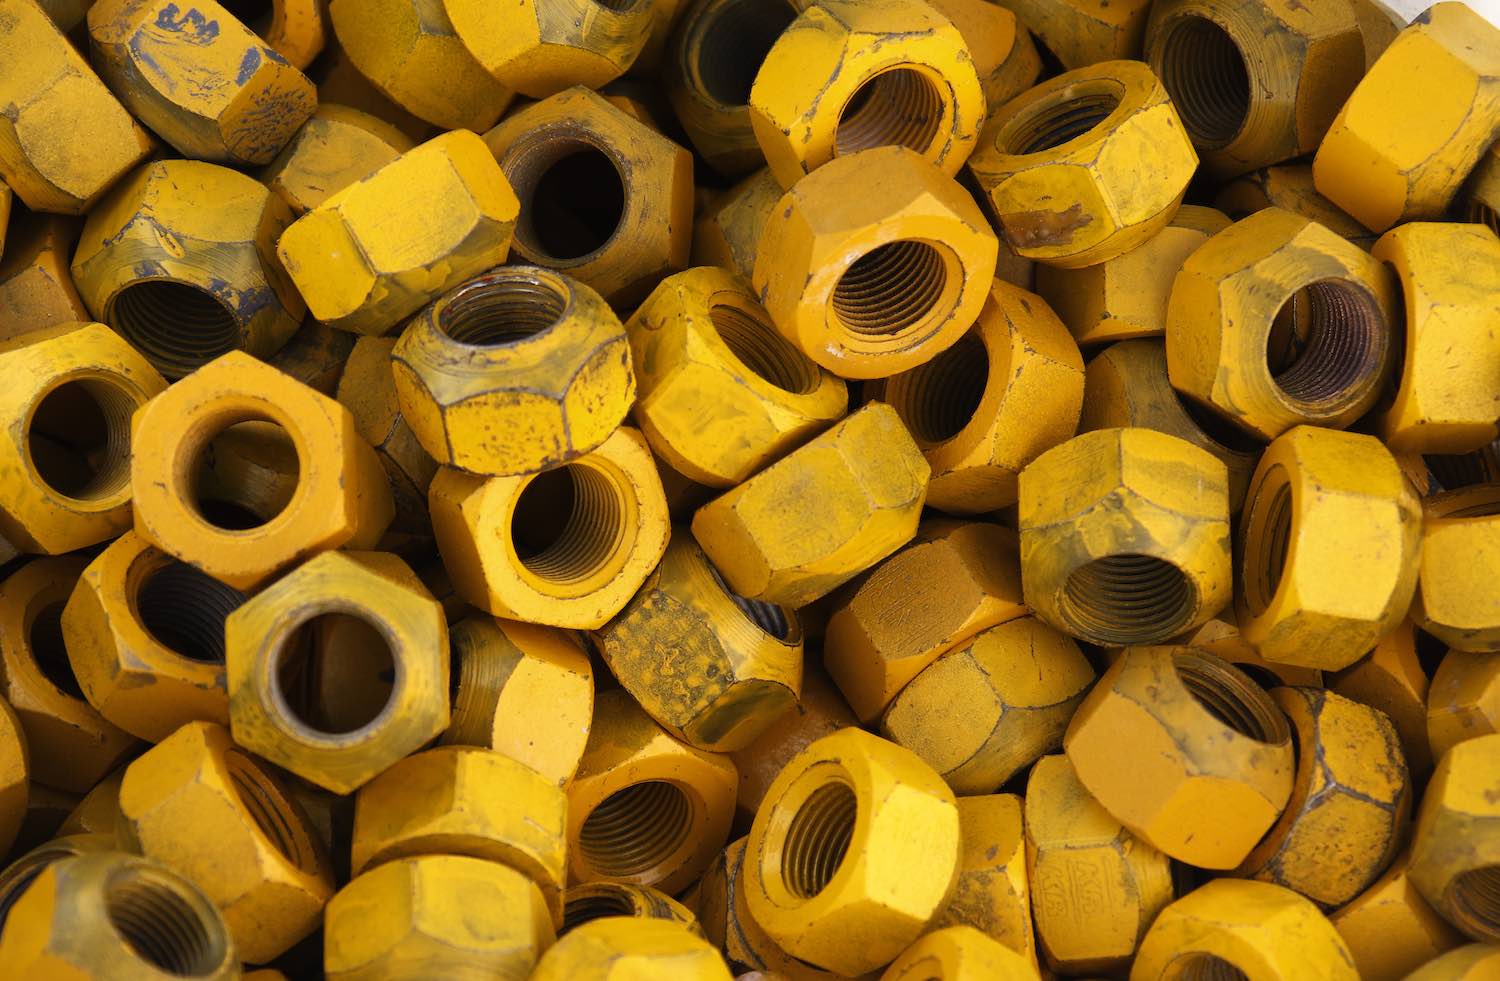 NASCAR lug nuts in a pile at the Bristol Motor Speedway pits